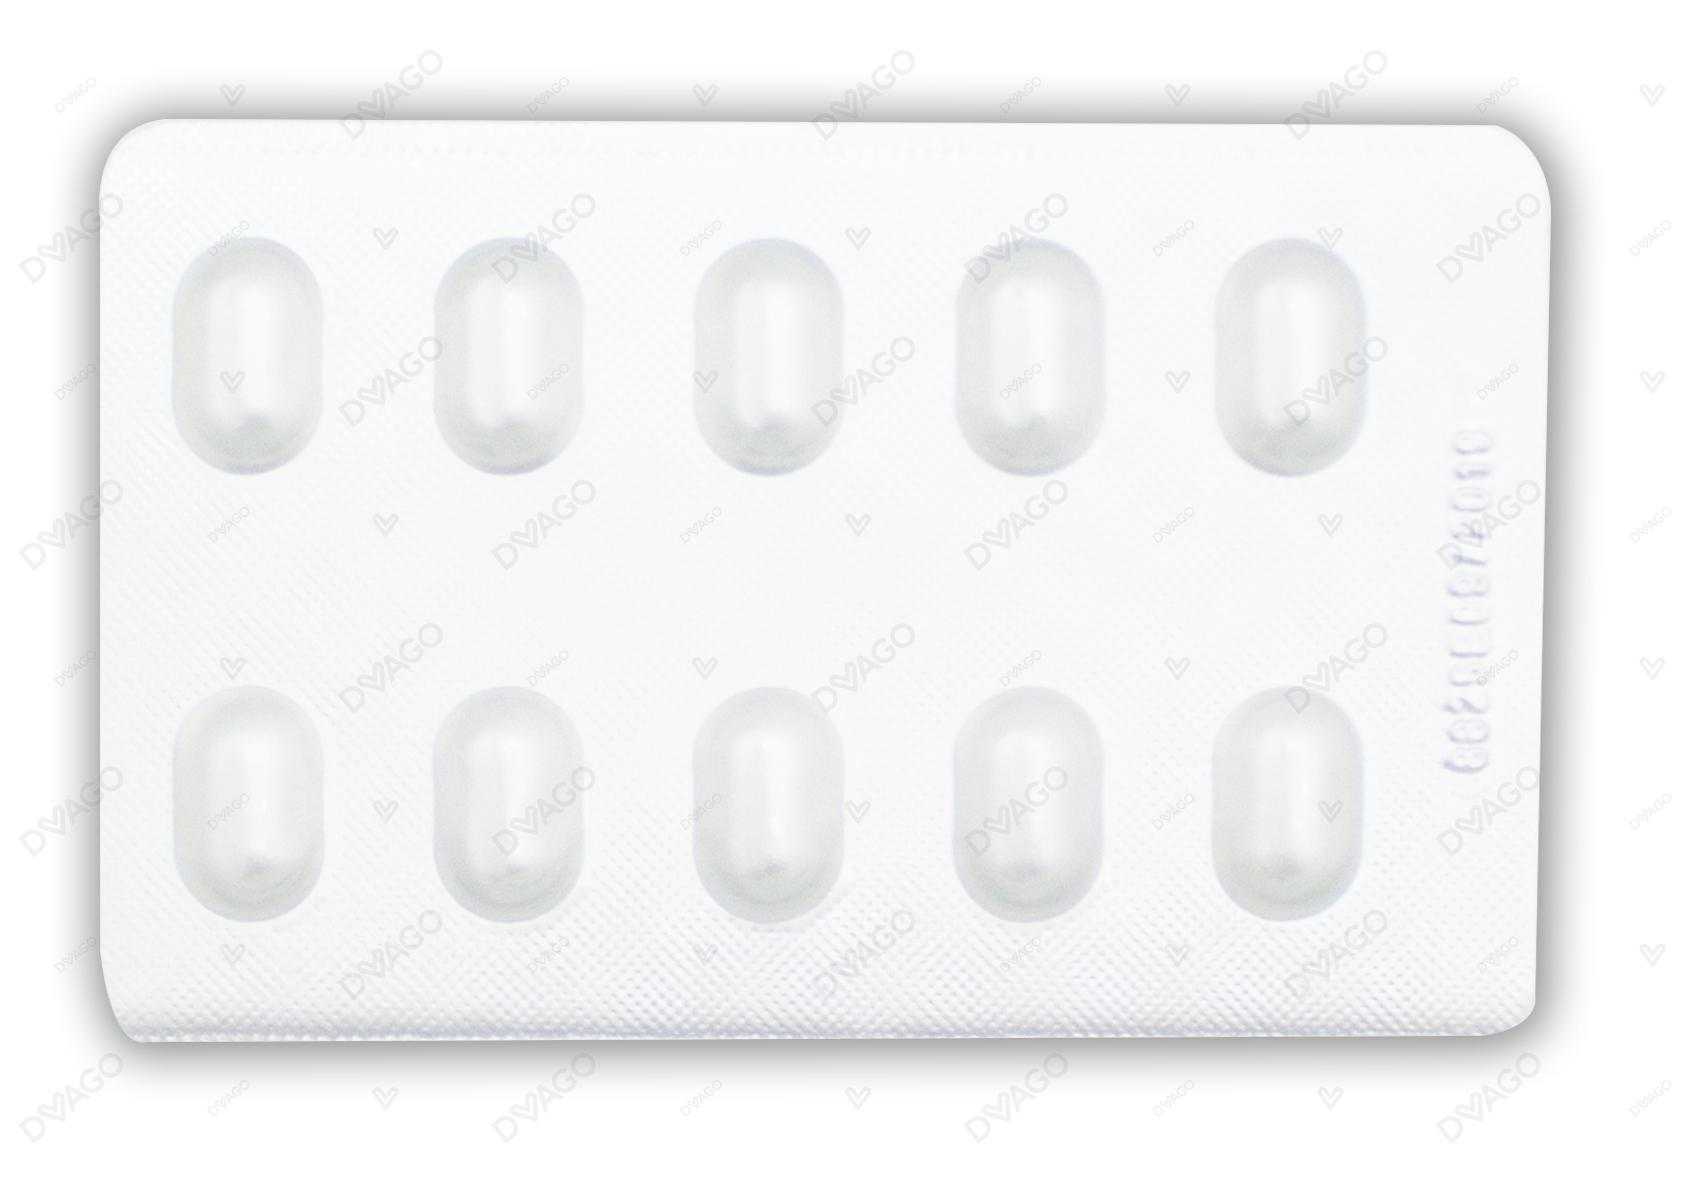 gluconorm tablets 1mg